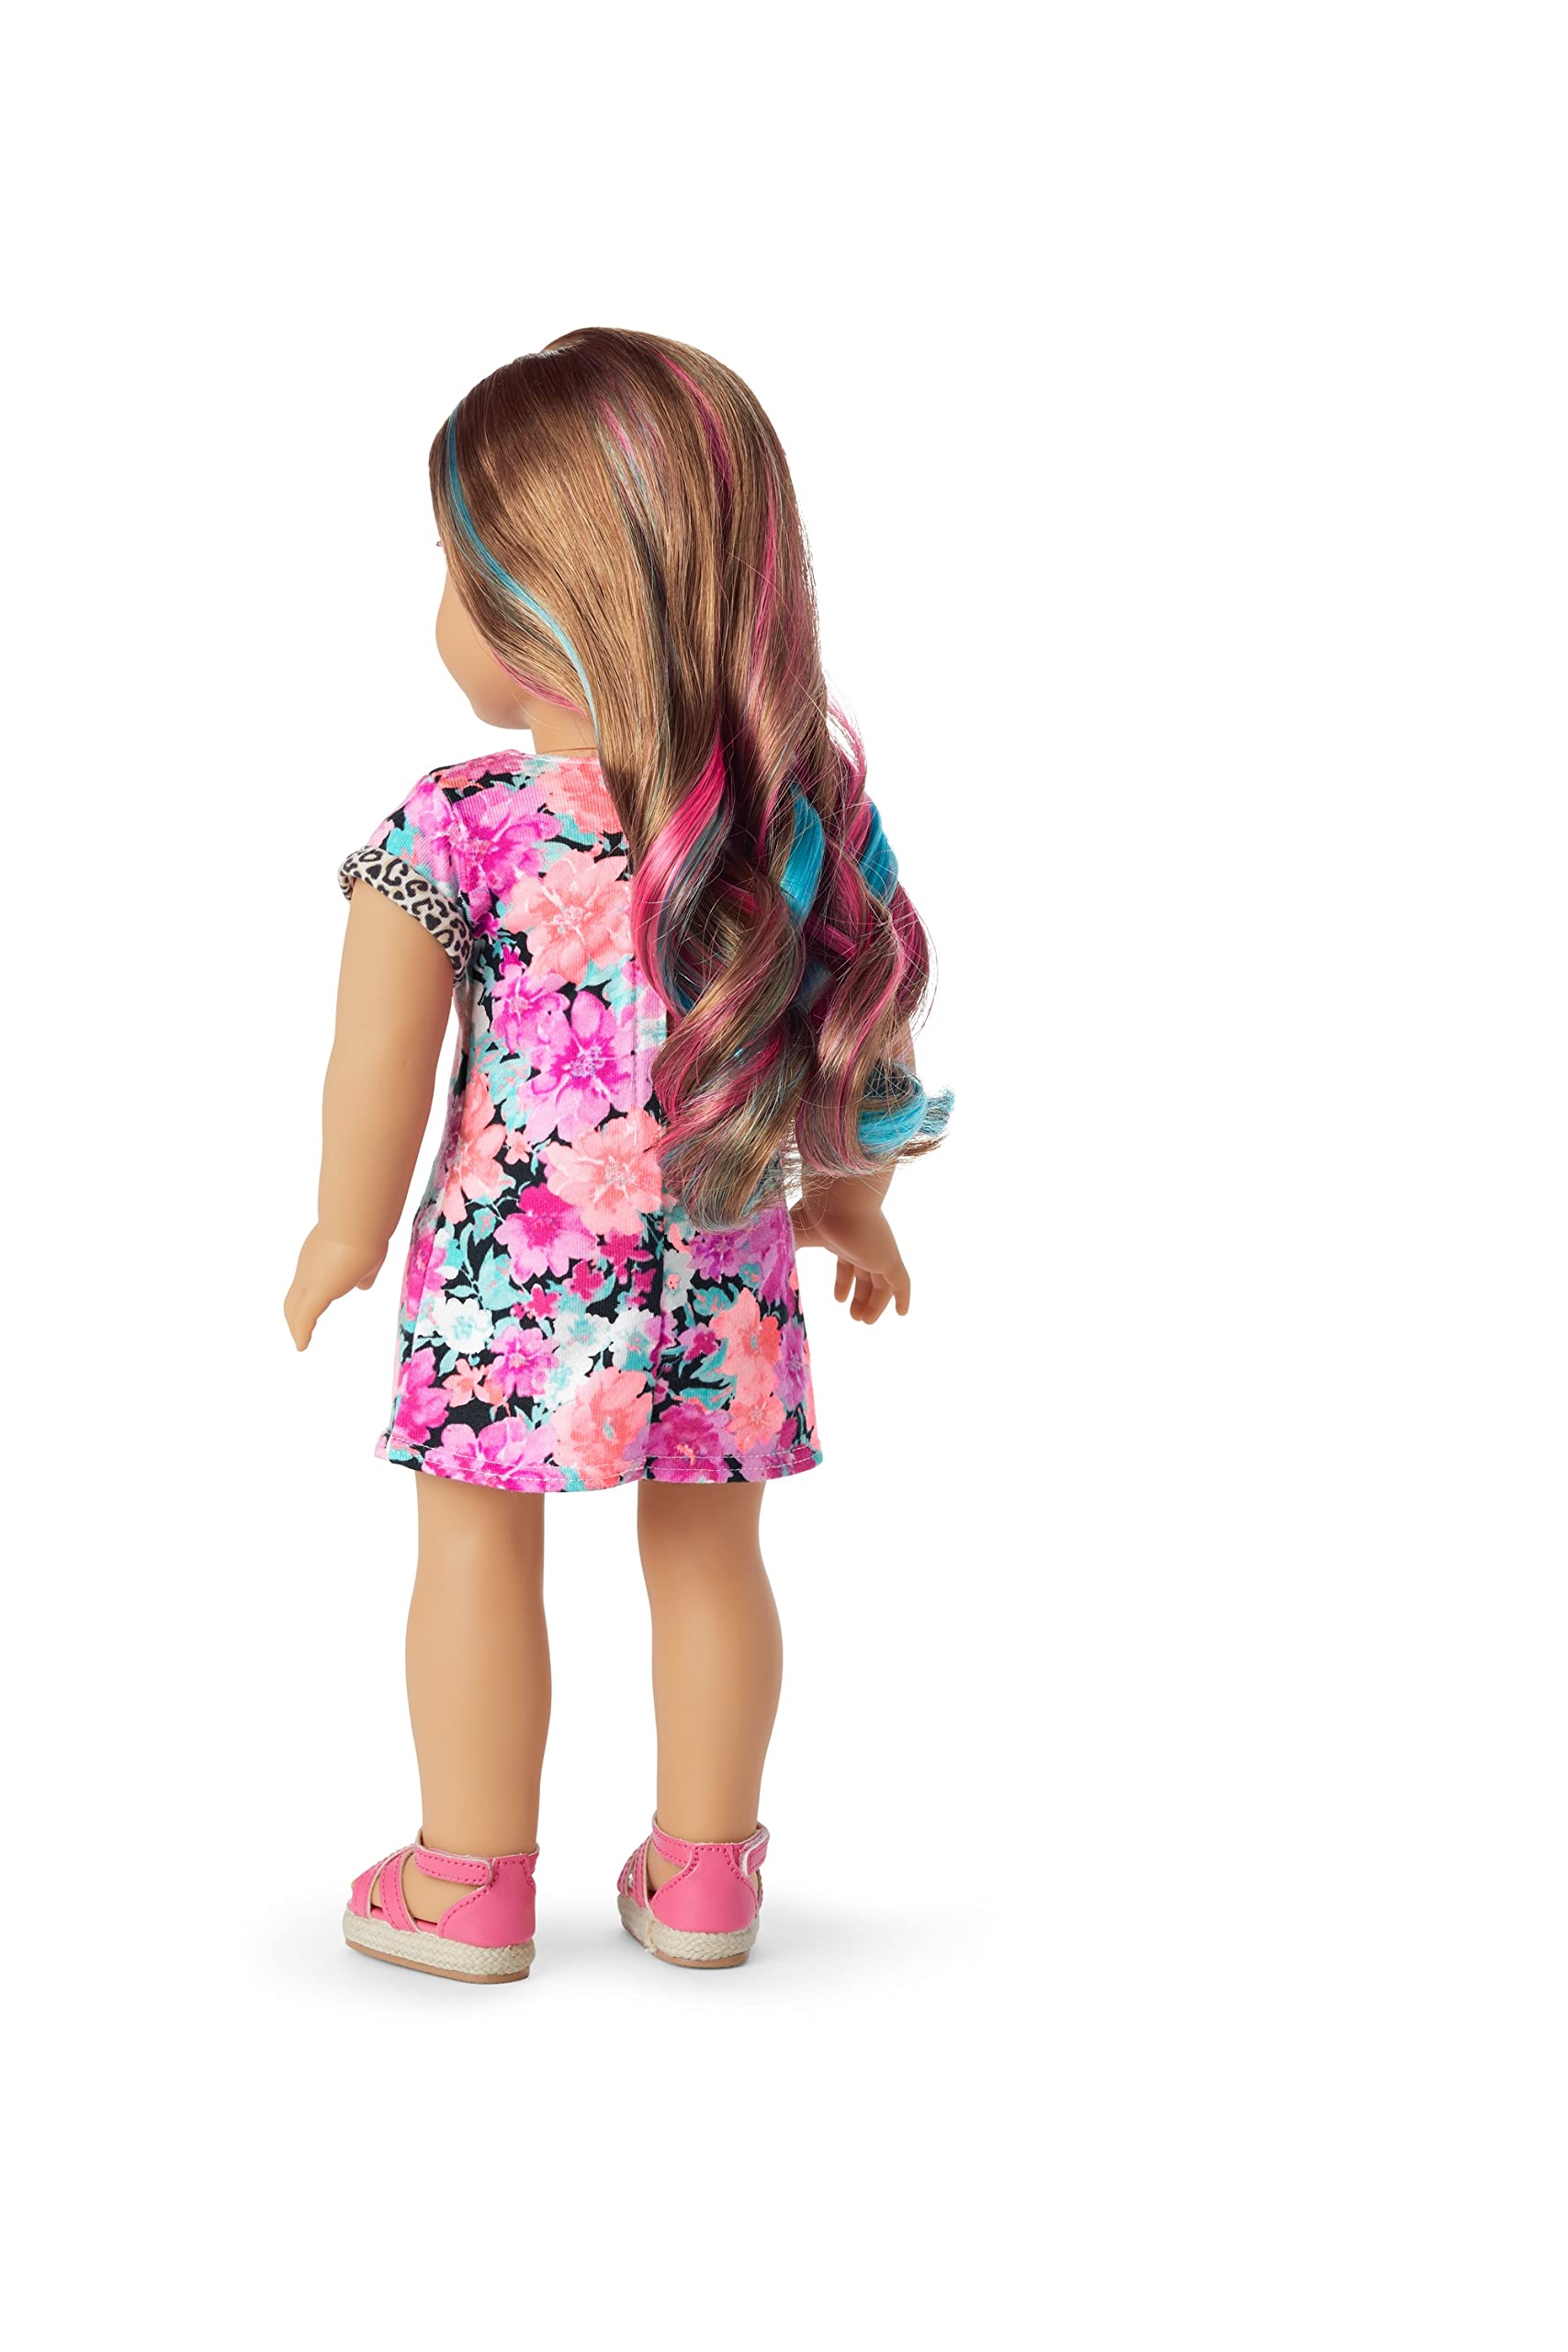 American Girl Truly Me 18-Inch Doll 101 with Gray Eyes, Wavy Caramel Hair with Pink and Blue Highlights, Light-to-Medium Skin with Warm Undertones, Floral Printed T-Shirt Dress